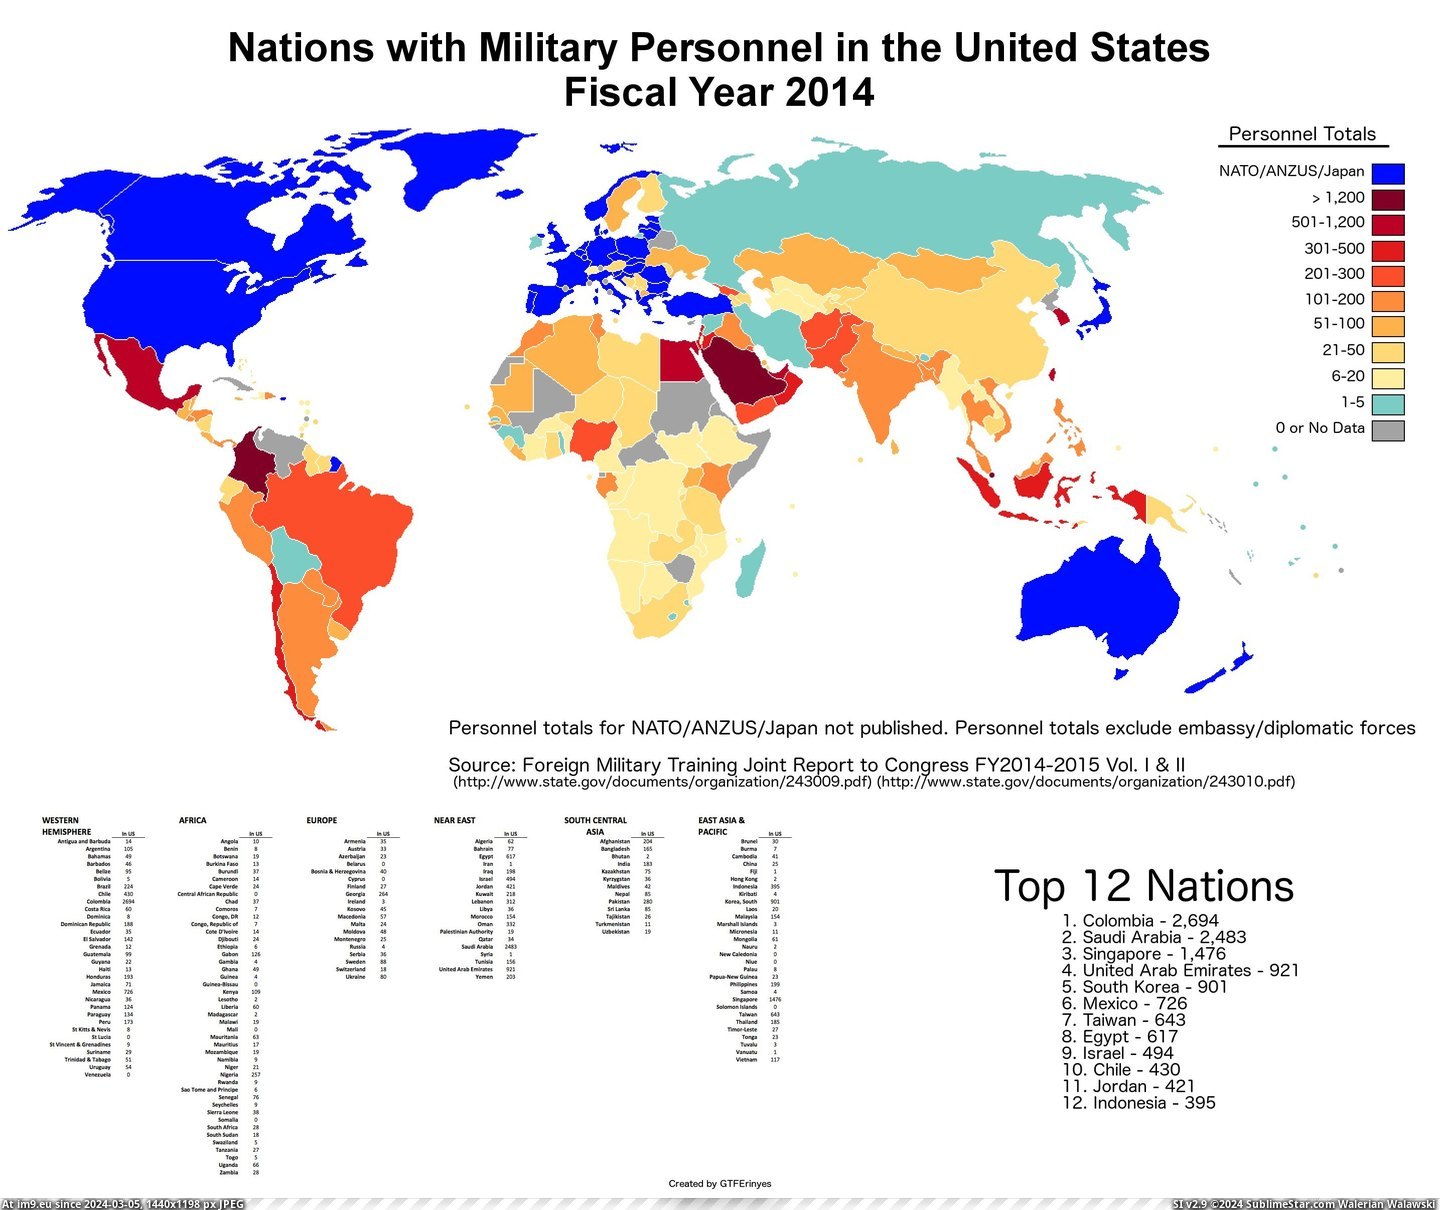 #States #Japan #United #Plot #Nato #Embassy #Military #Nations #Twist [Mapporn] Plot Twist: Nations with military personnel INSIDE the United States in 2014 (excluding NATO-ANZUS-Japan and embassy-d Pic. (Image of album My r/MAPS favs))